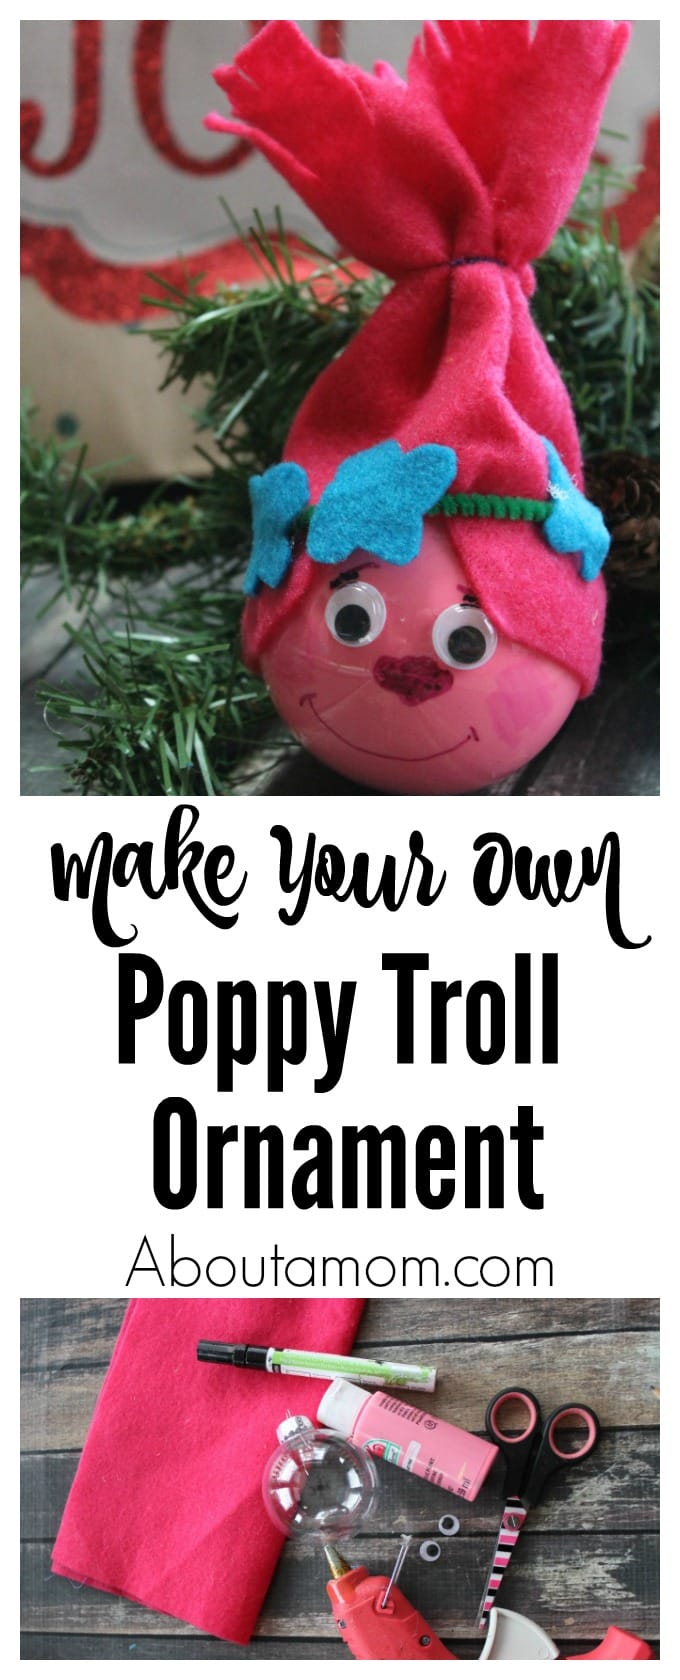 Make your own Poppy Troll ornament this Christmas